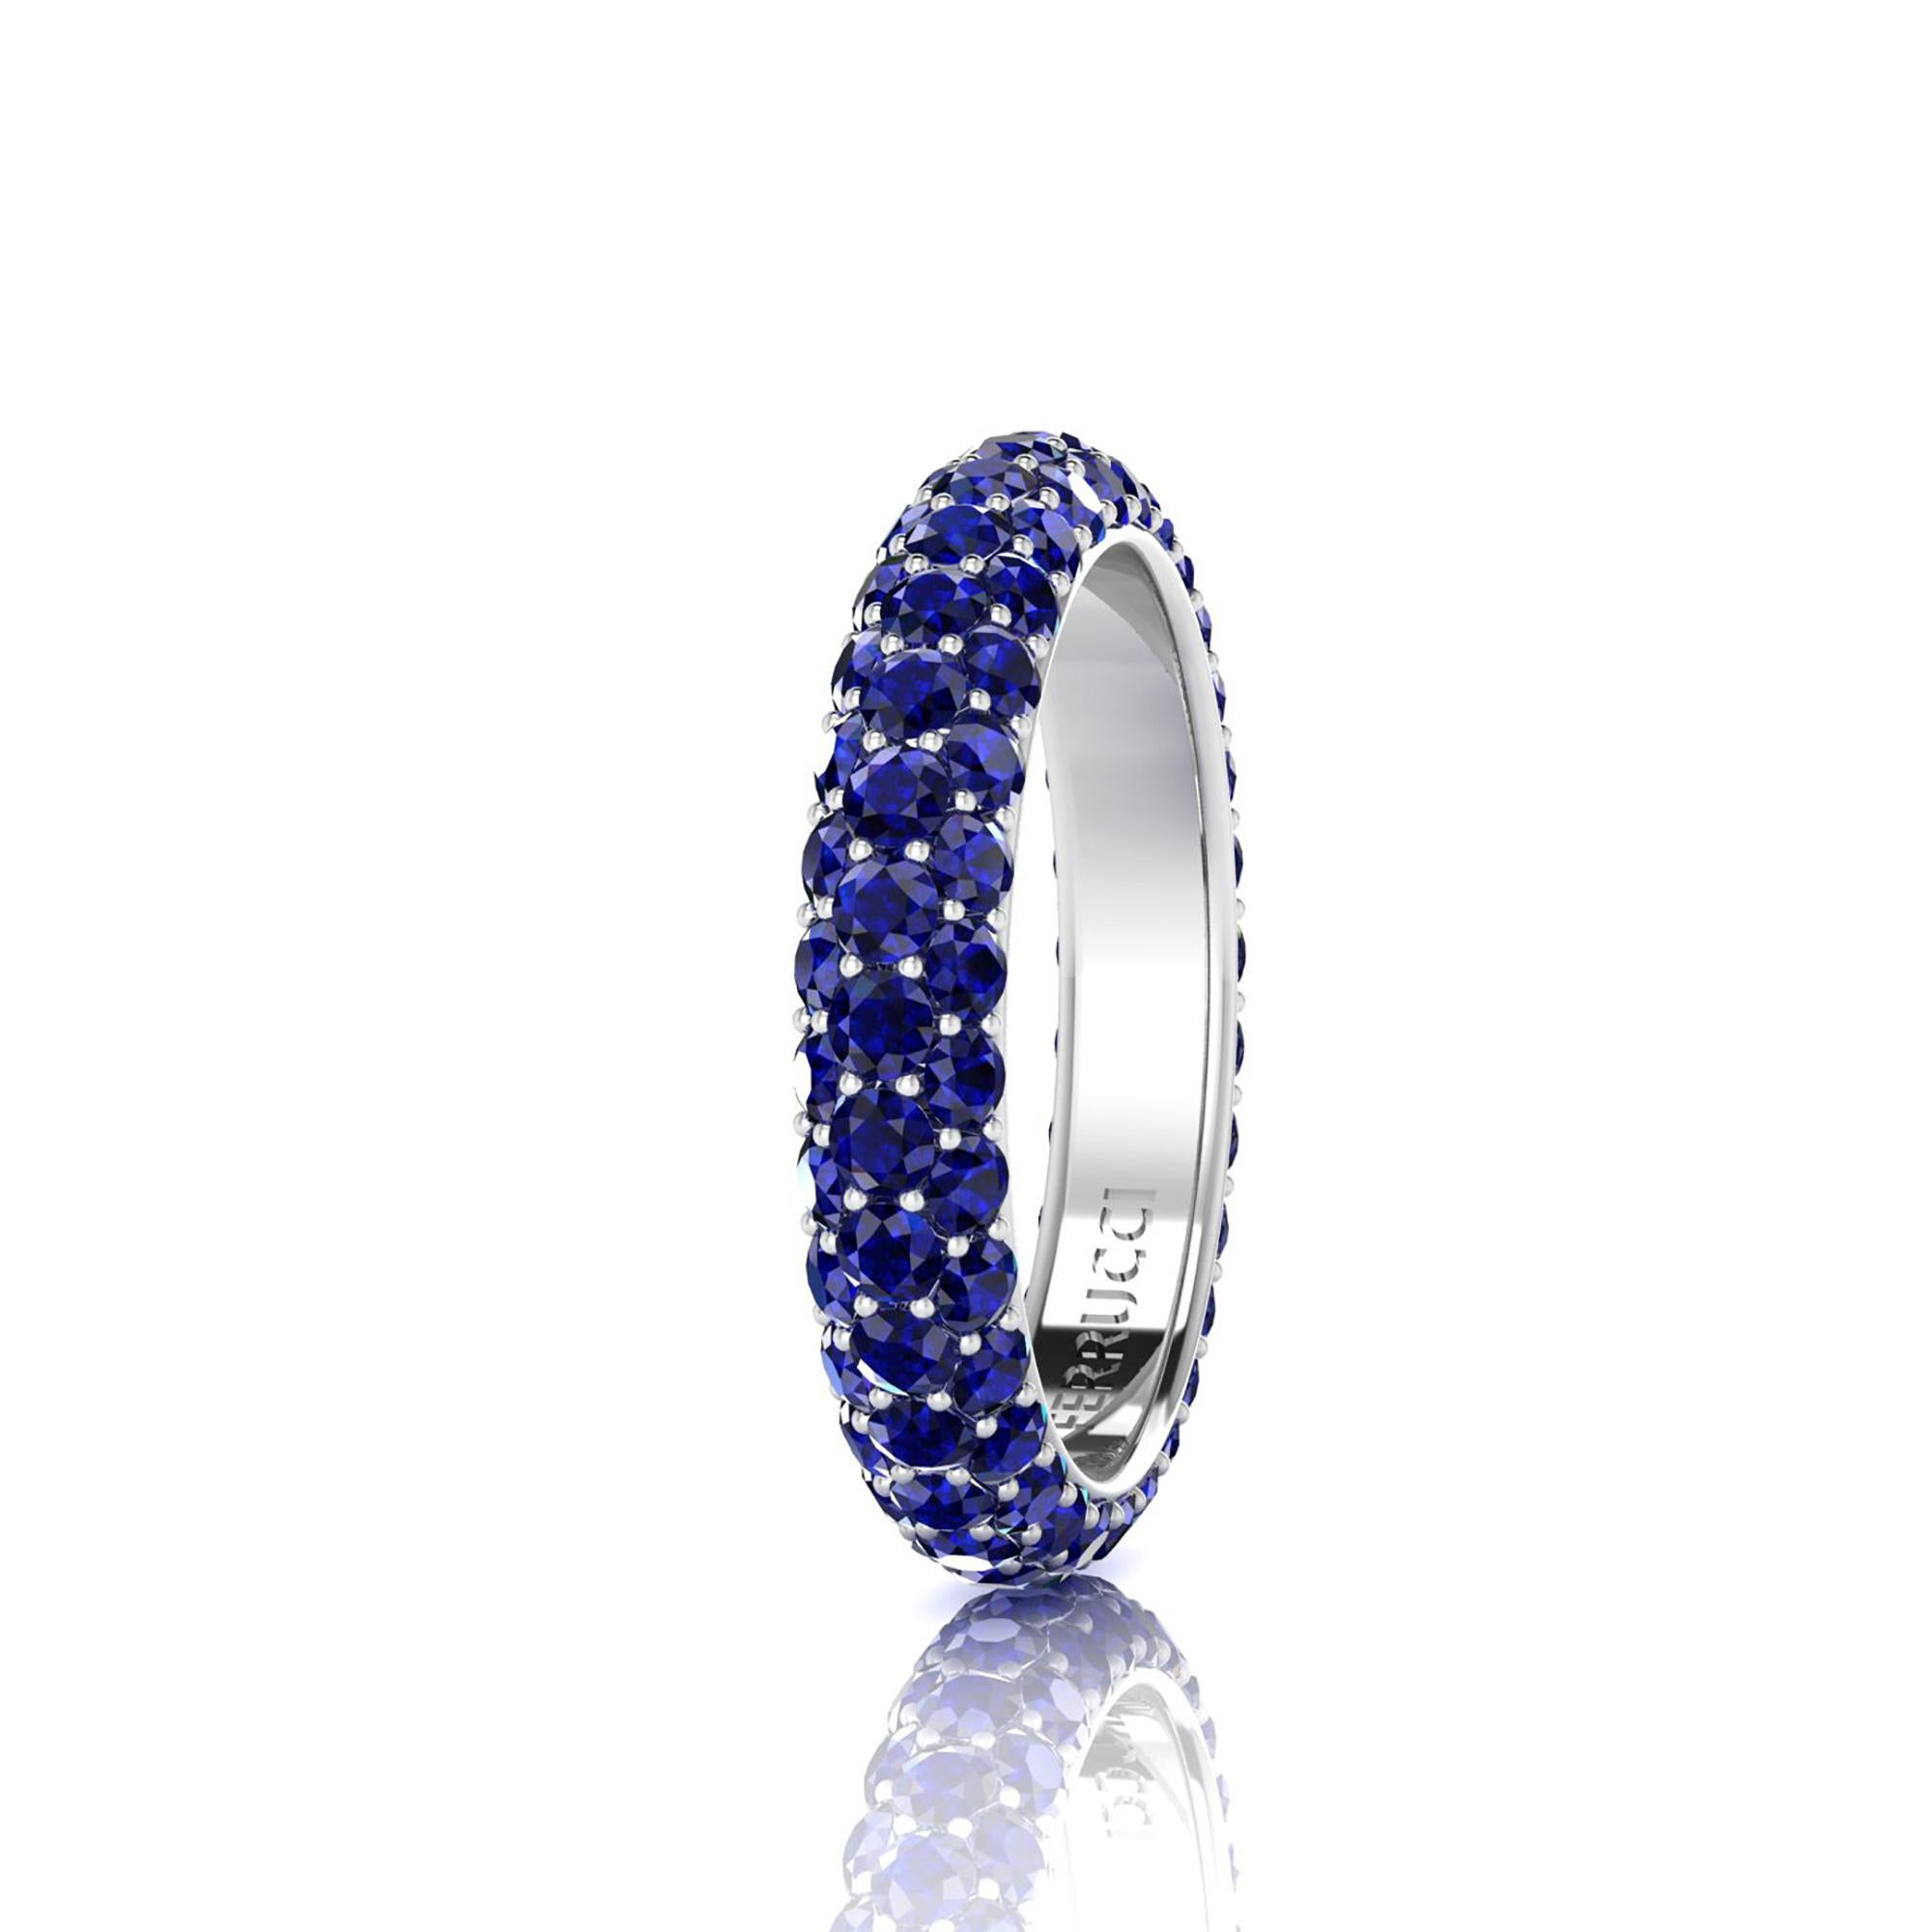 FERRUCCI blue sapphires eternity ring, for an approximate total carat weight of 2.60 carat, hand made in New York City with the best Italian craftsmanship, conceived in 18k white gold.
Classic, sophisticated, gorgeous, everlasting look, for a